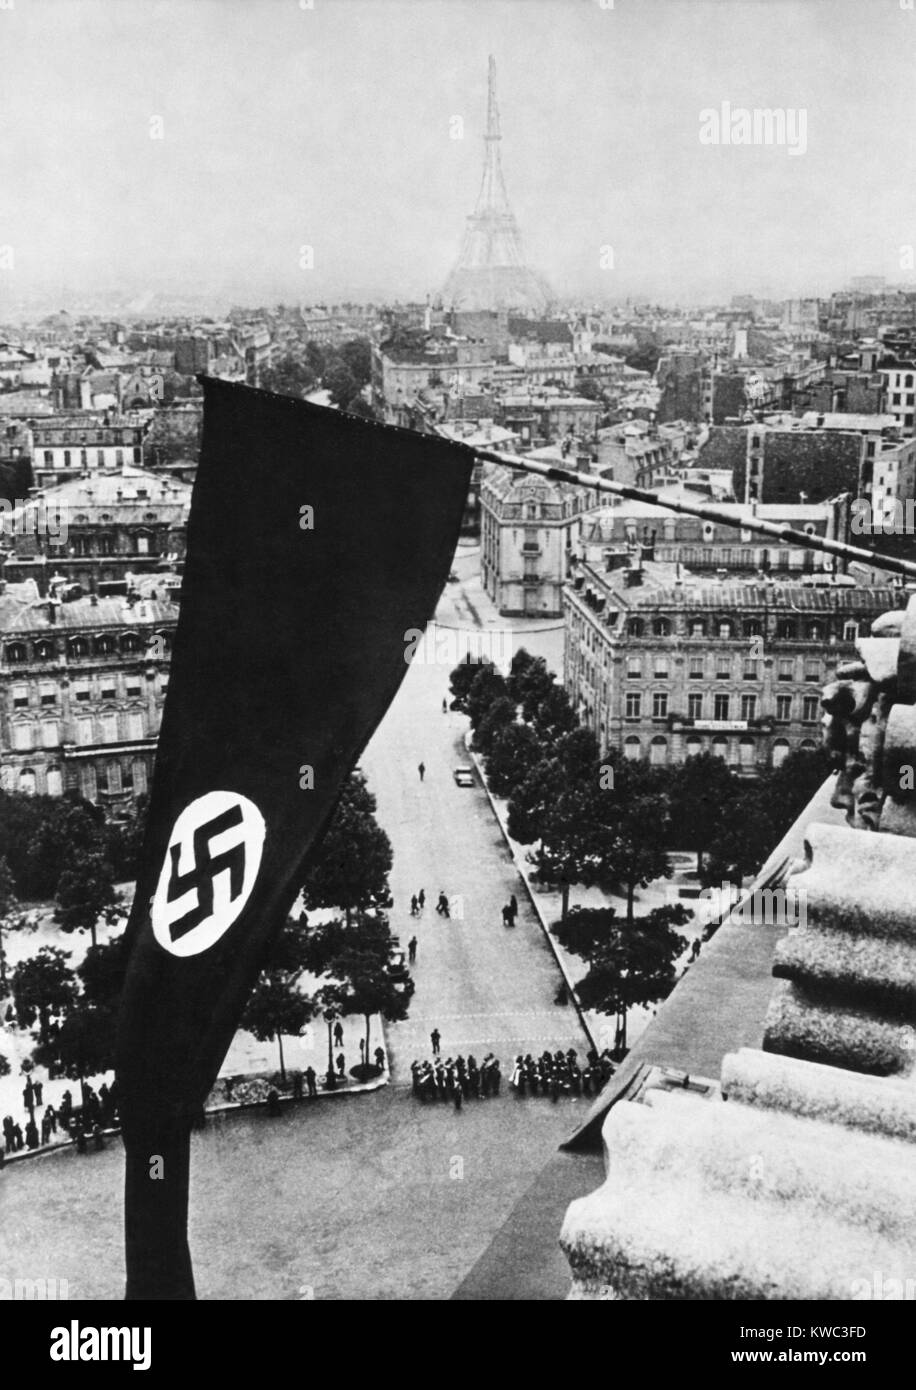 Nazi Swastika flag on the Arc de Triomphe after German occupation of Paris, June 1940, World War 2 (BSLOC 2015 13 80) Stock Photo